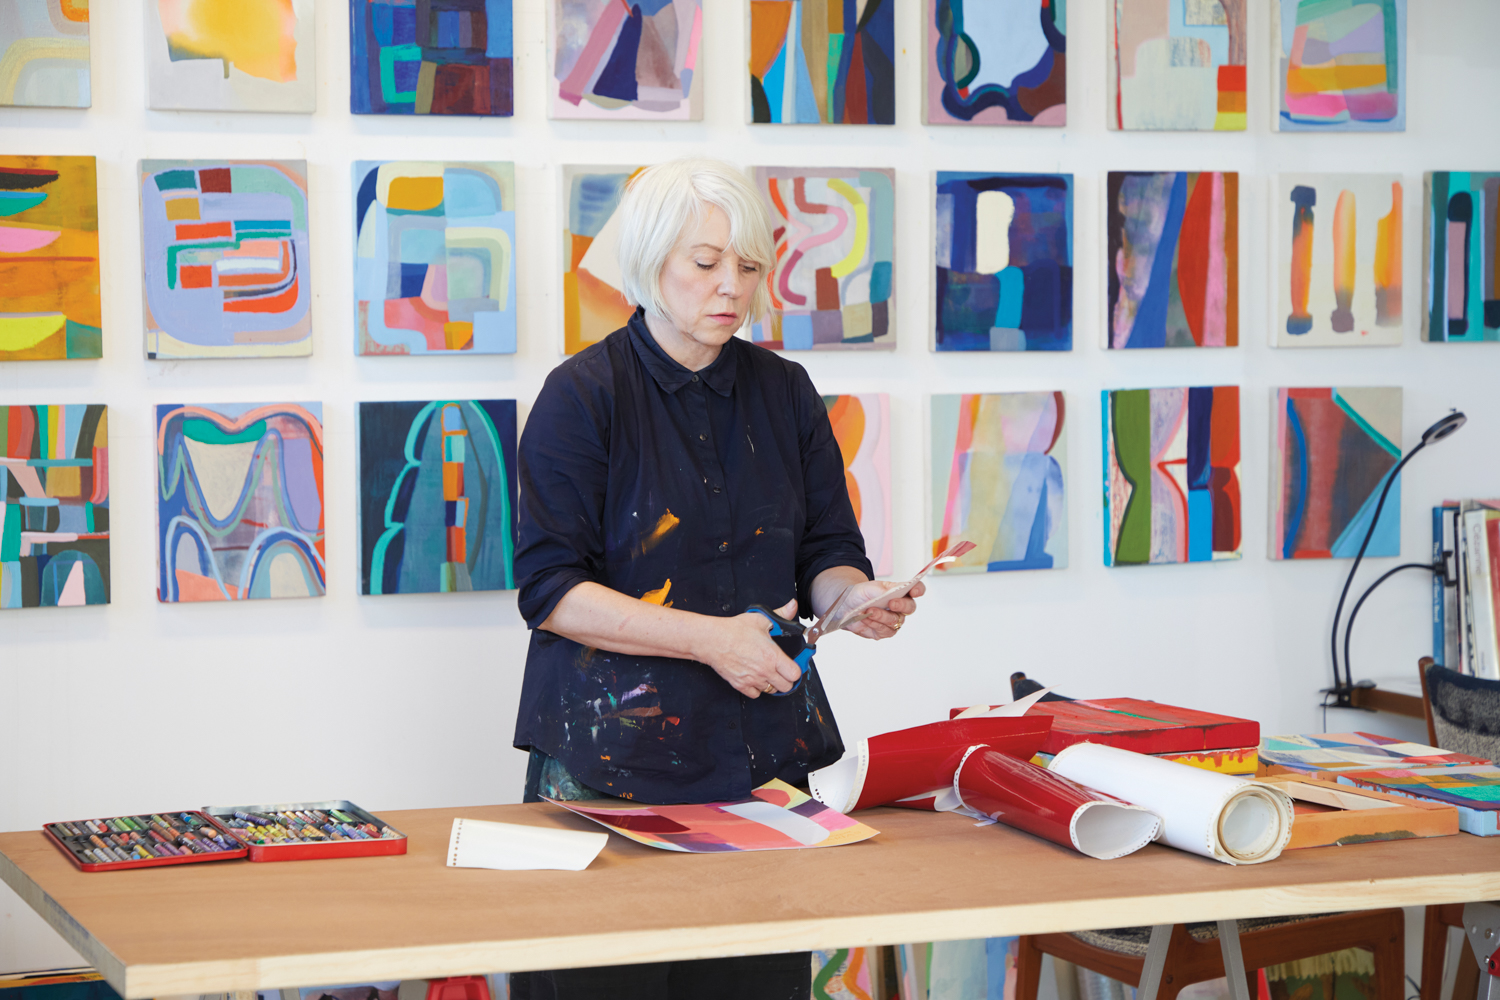 artist Anna Kunz cutting paper in front of a grouping of colorful paintings